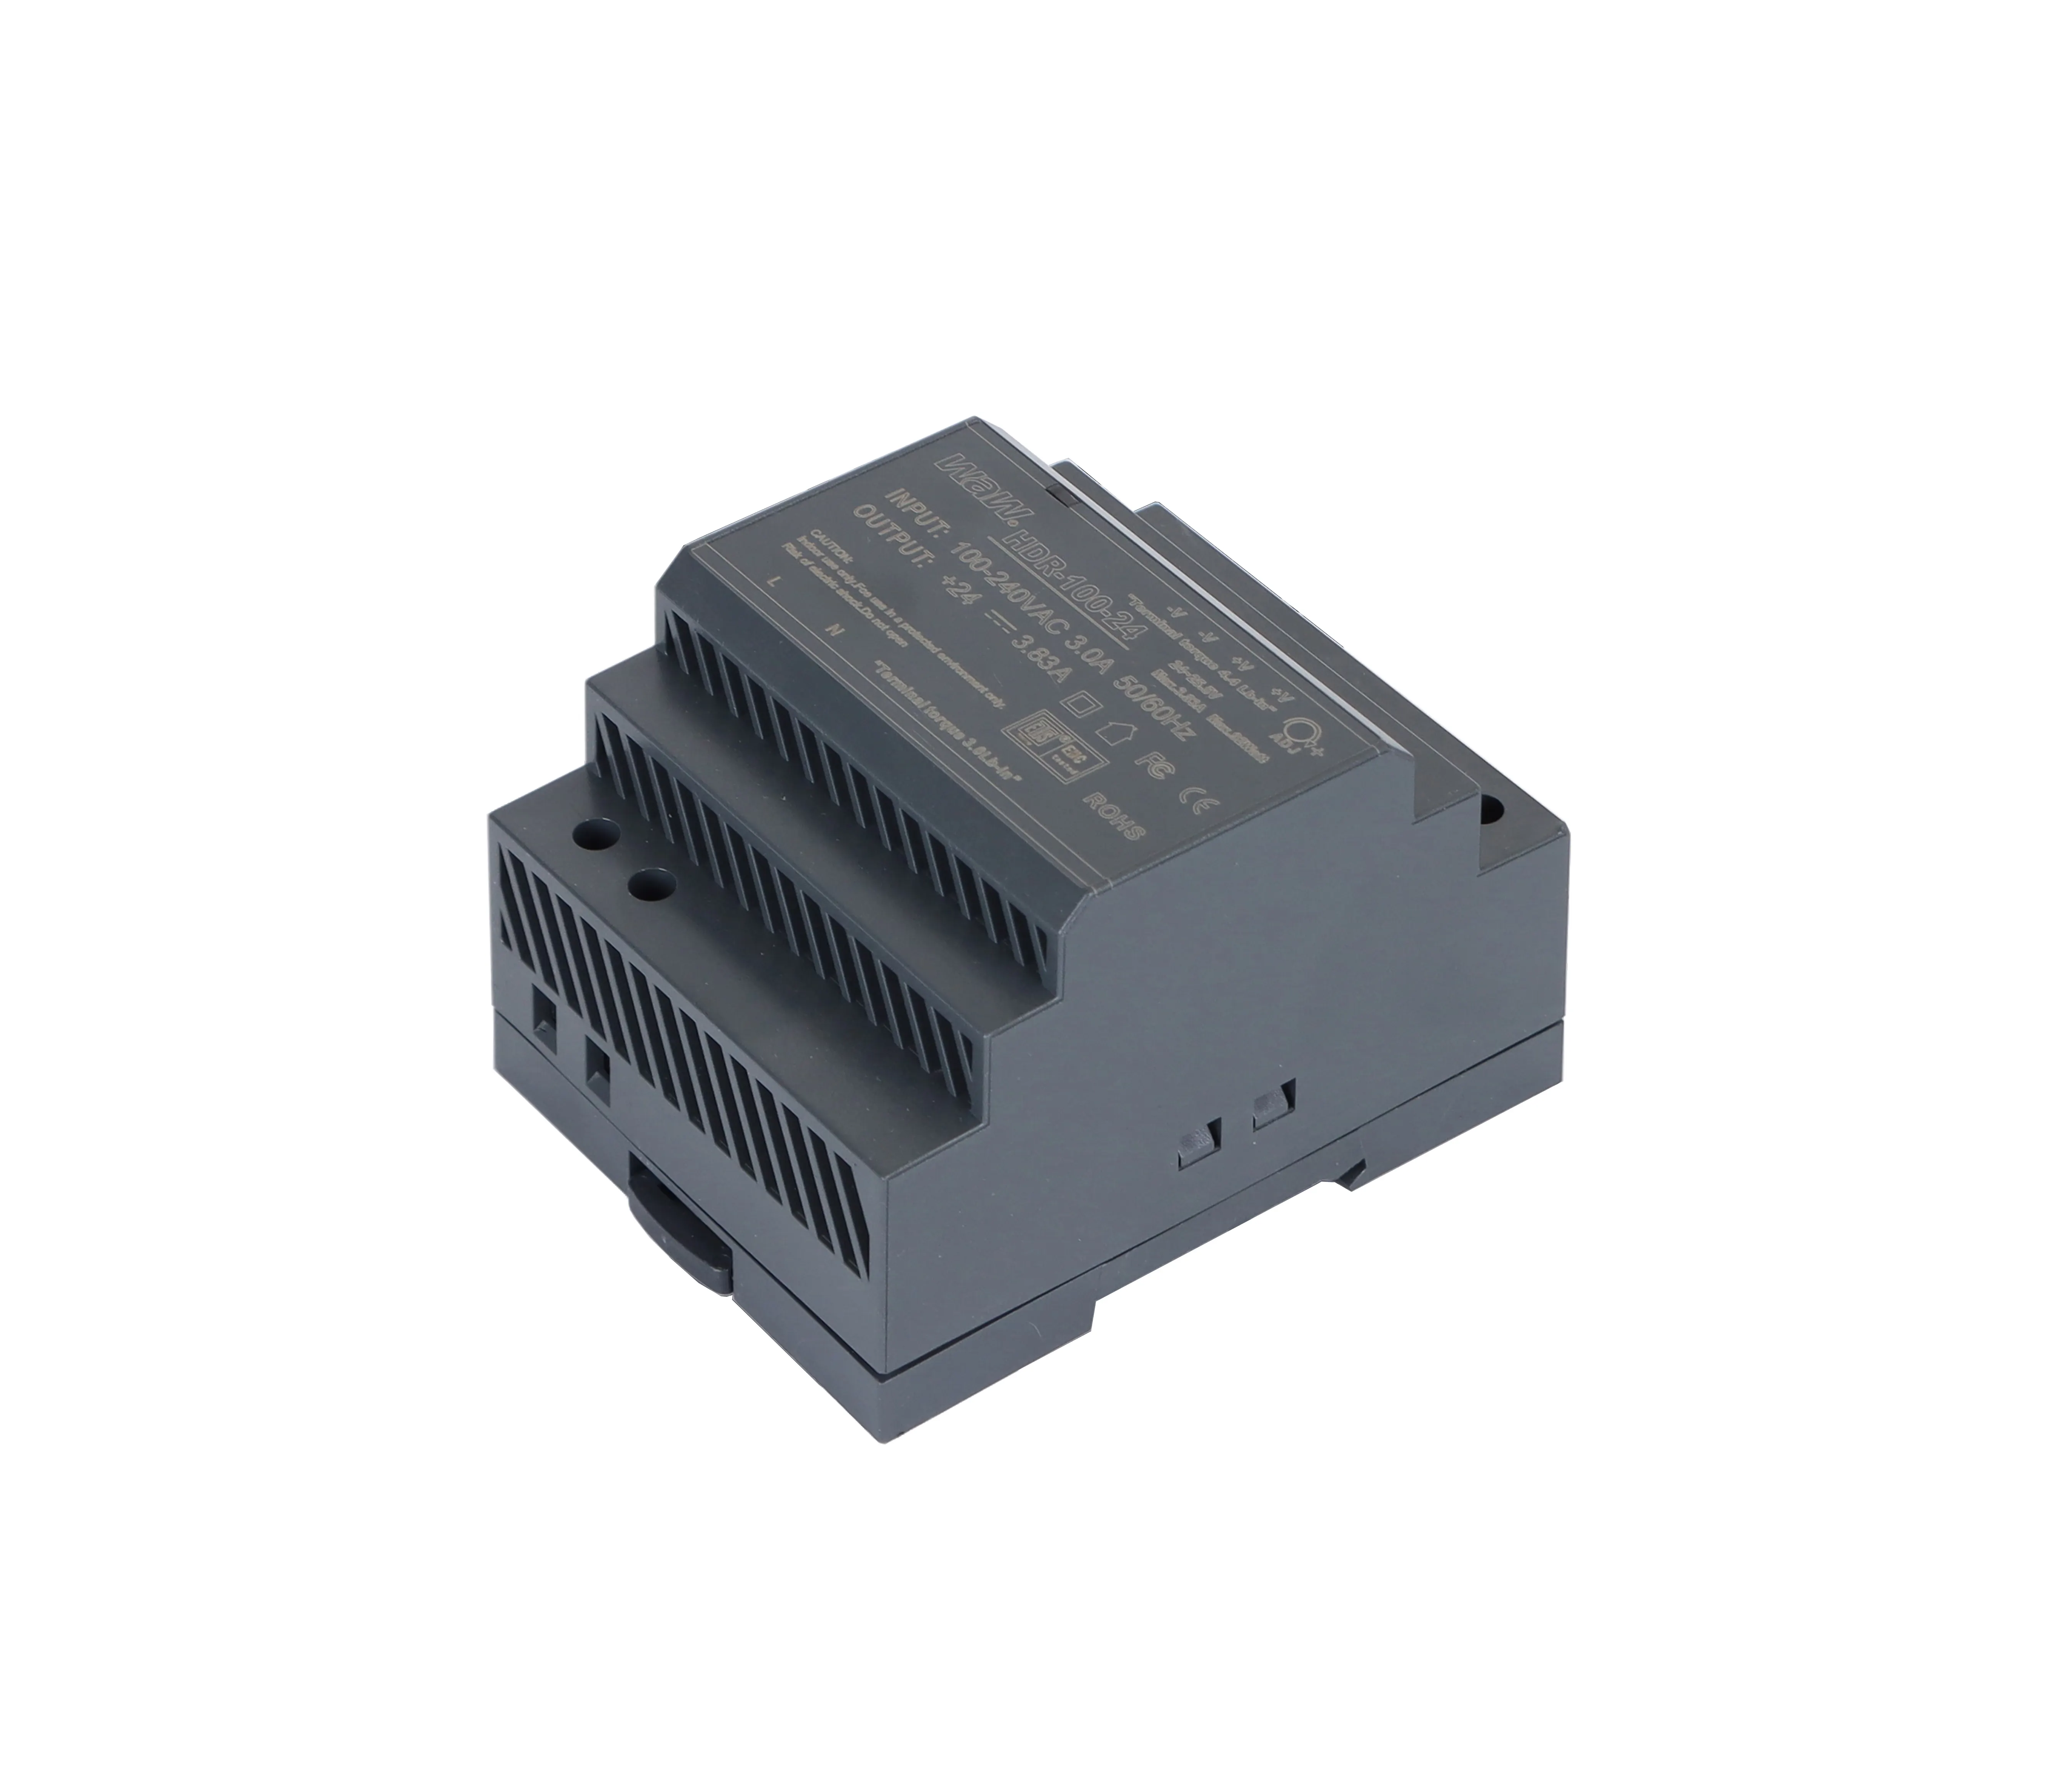 DIN Rail Switching Power Supply 100W HDR-100-24 24V 4.2A for Industrial Control Systems